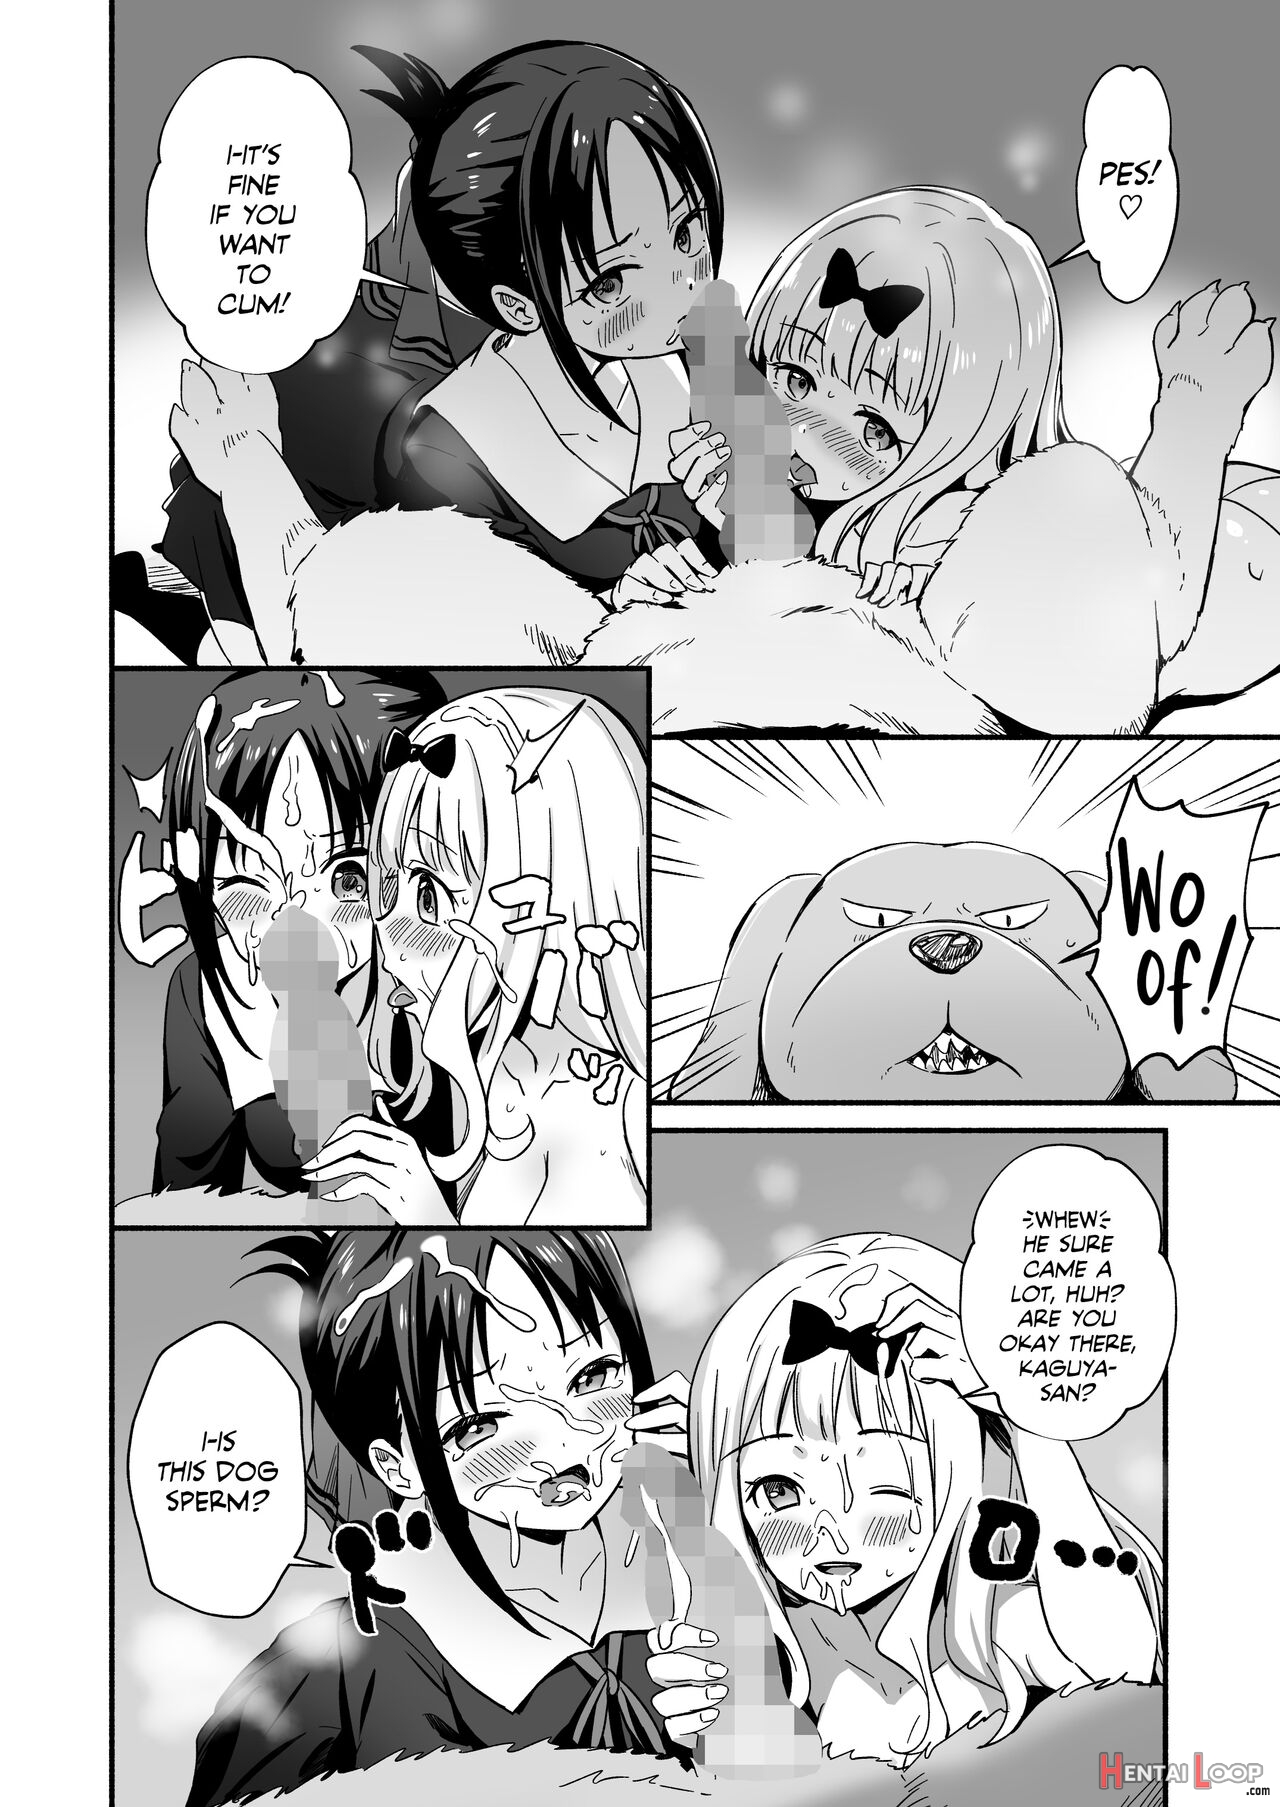 Kaguya-san Takes Care Of Pes's Sexual Urges! page 16